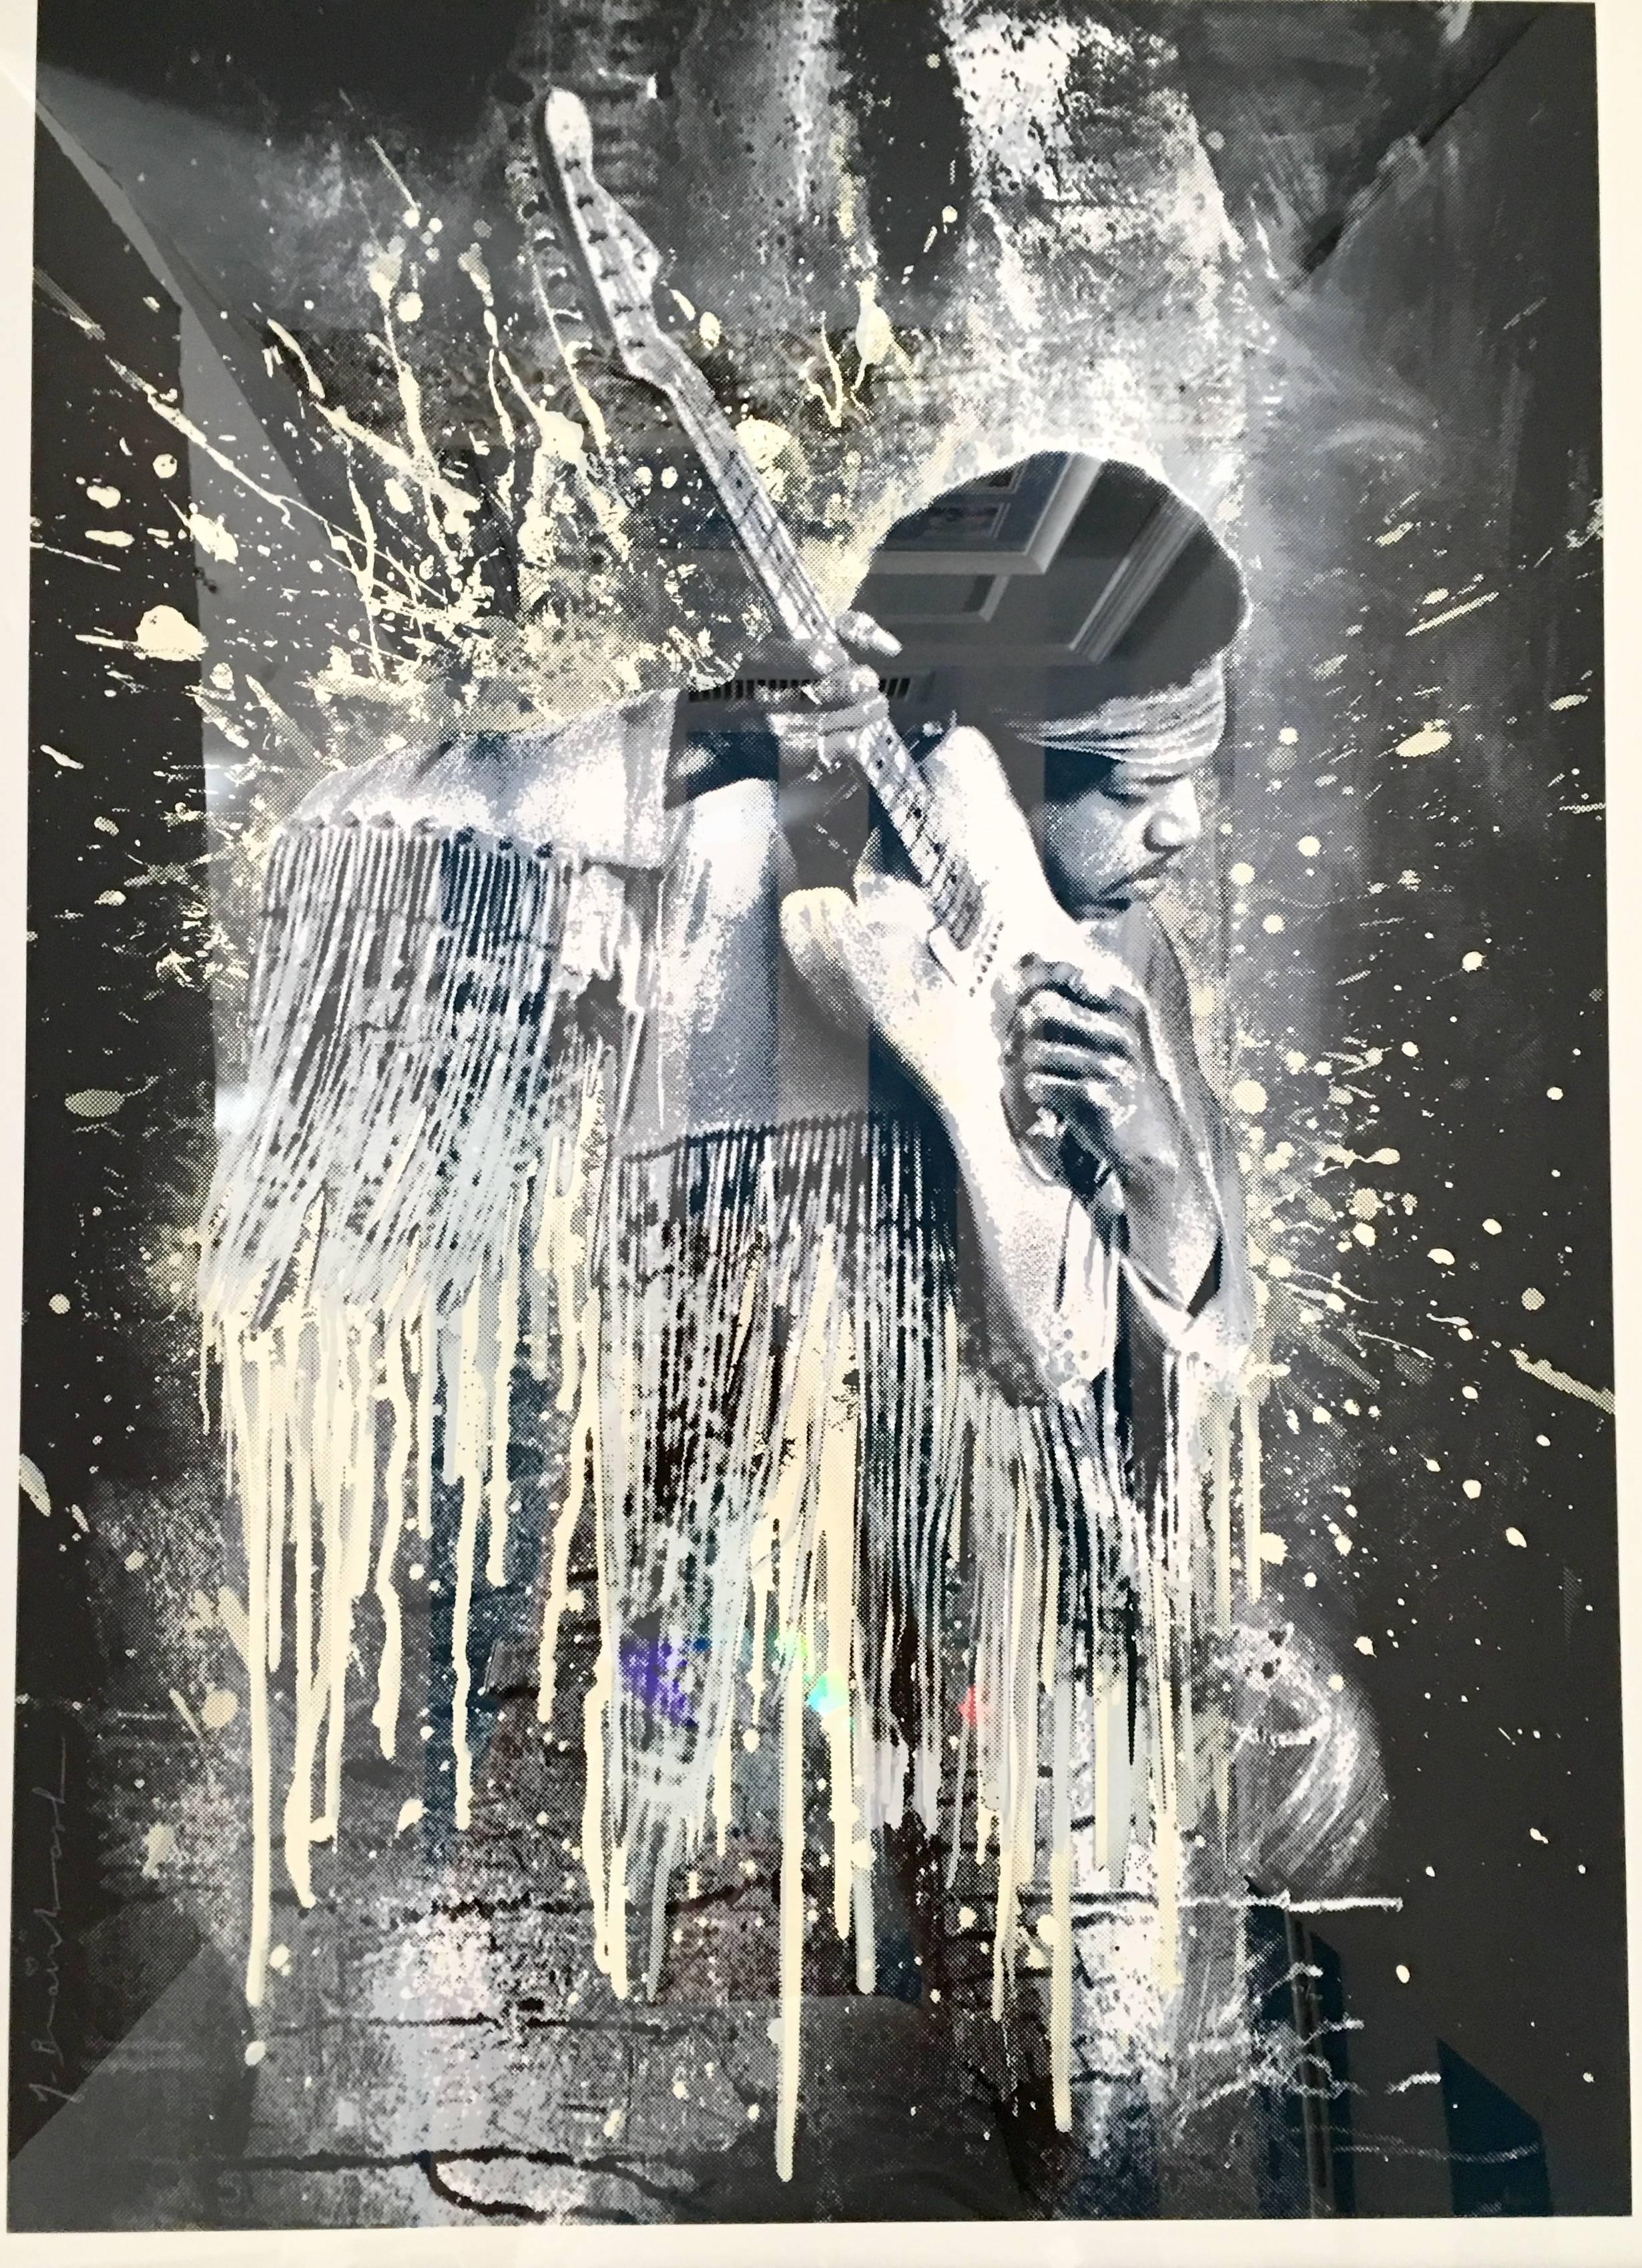 Original five color screen-print rare limited edition of 70 lithograph on torn edge archival paper of Jimi Hendrix in silver by, Mr. Brainwash framed. Hand signed and numbered lower left, Mr. Brainwash. Framed in a black wood frame under